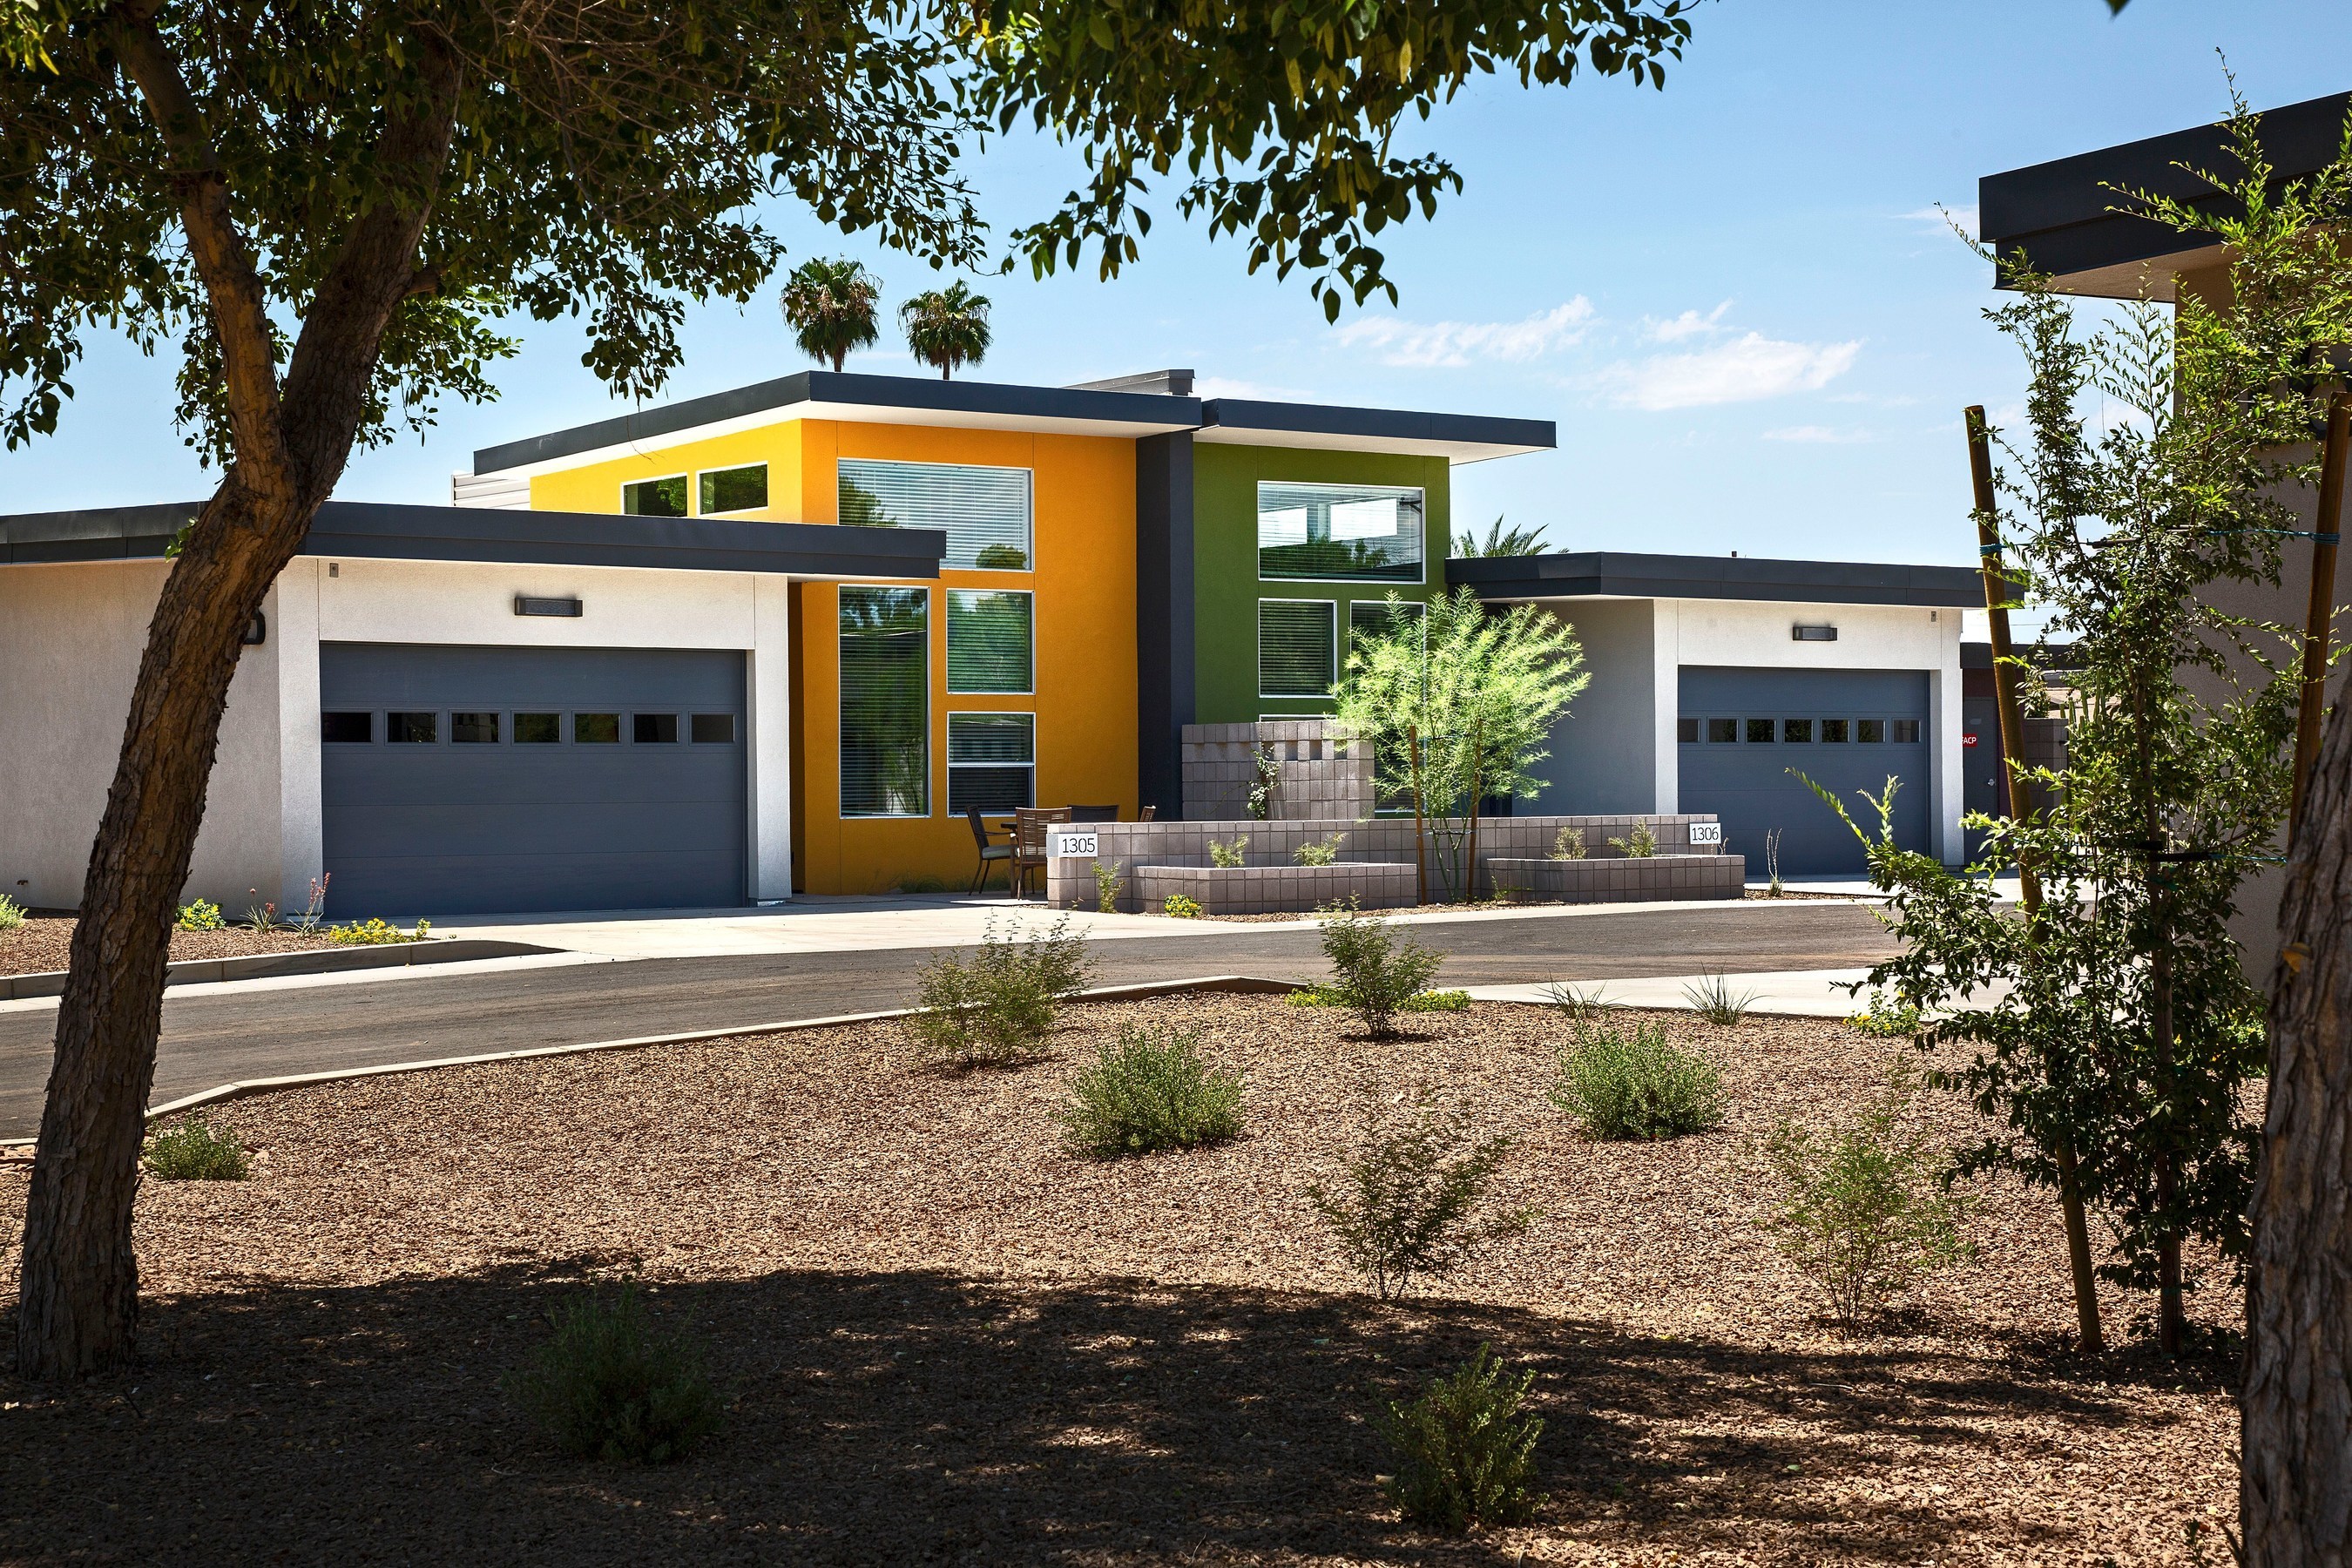 Beatitudes Senior Housing Campus Completes Its Latest Expansion With Addition of Neighborhood of Patio Homes in Phoenix 